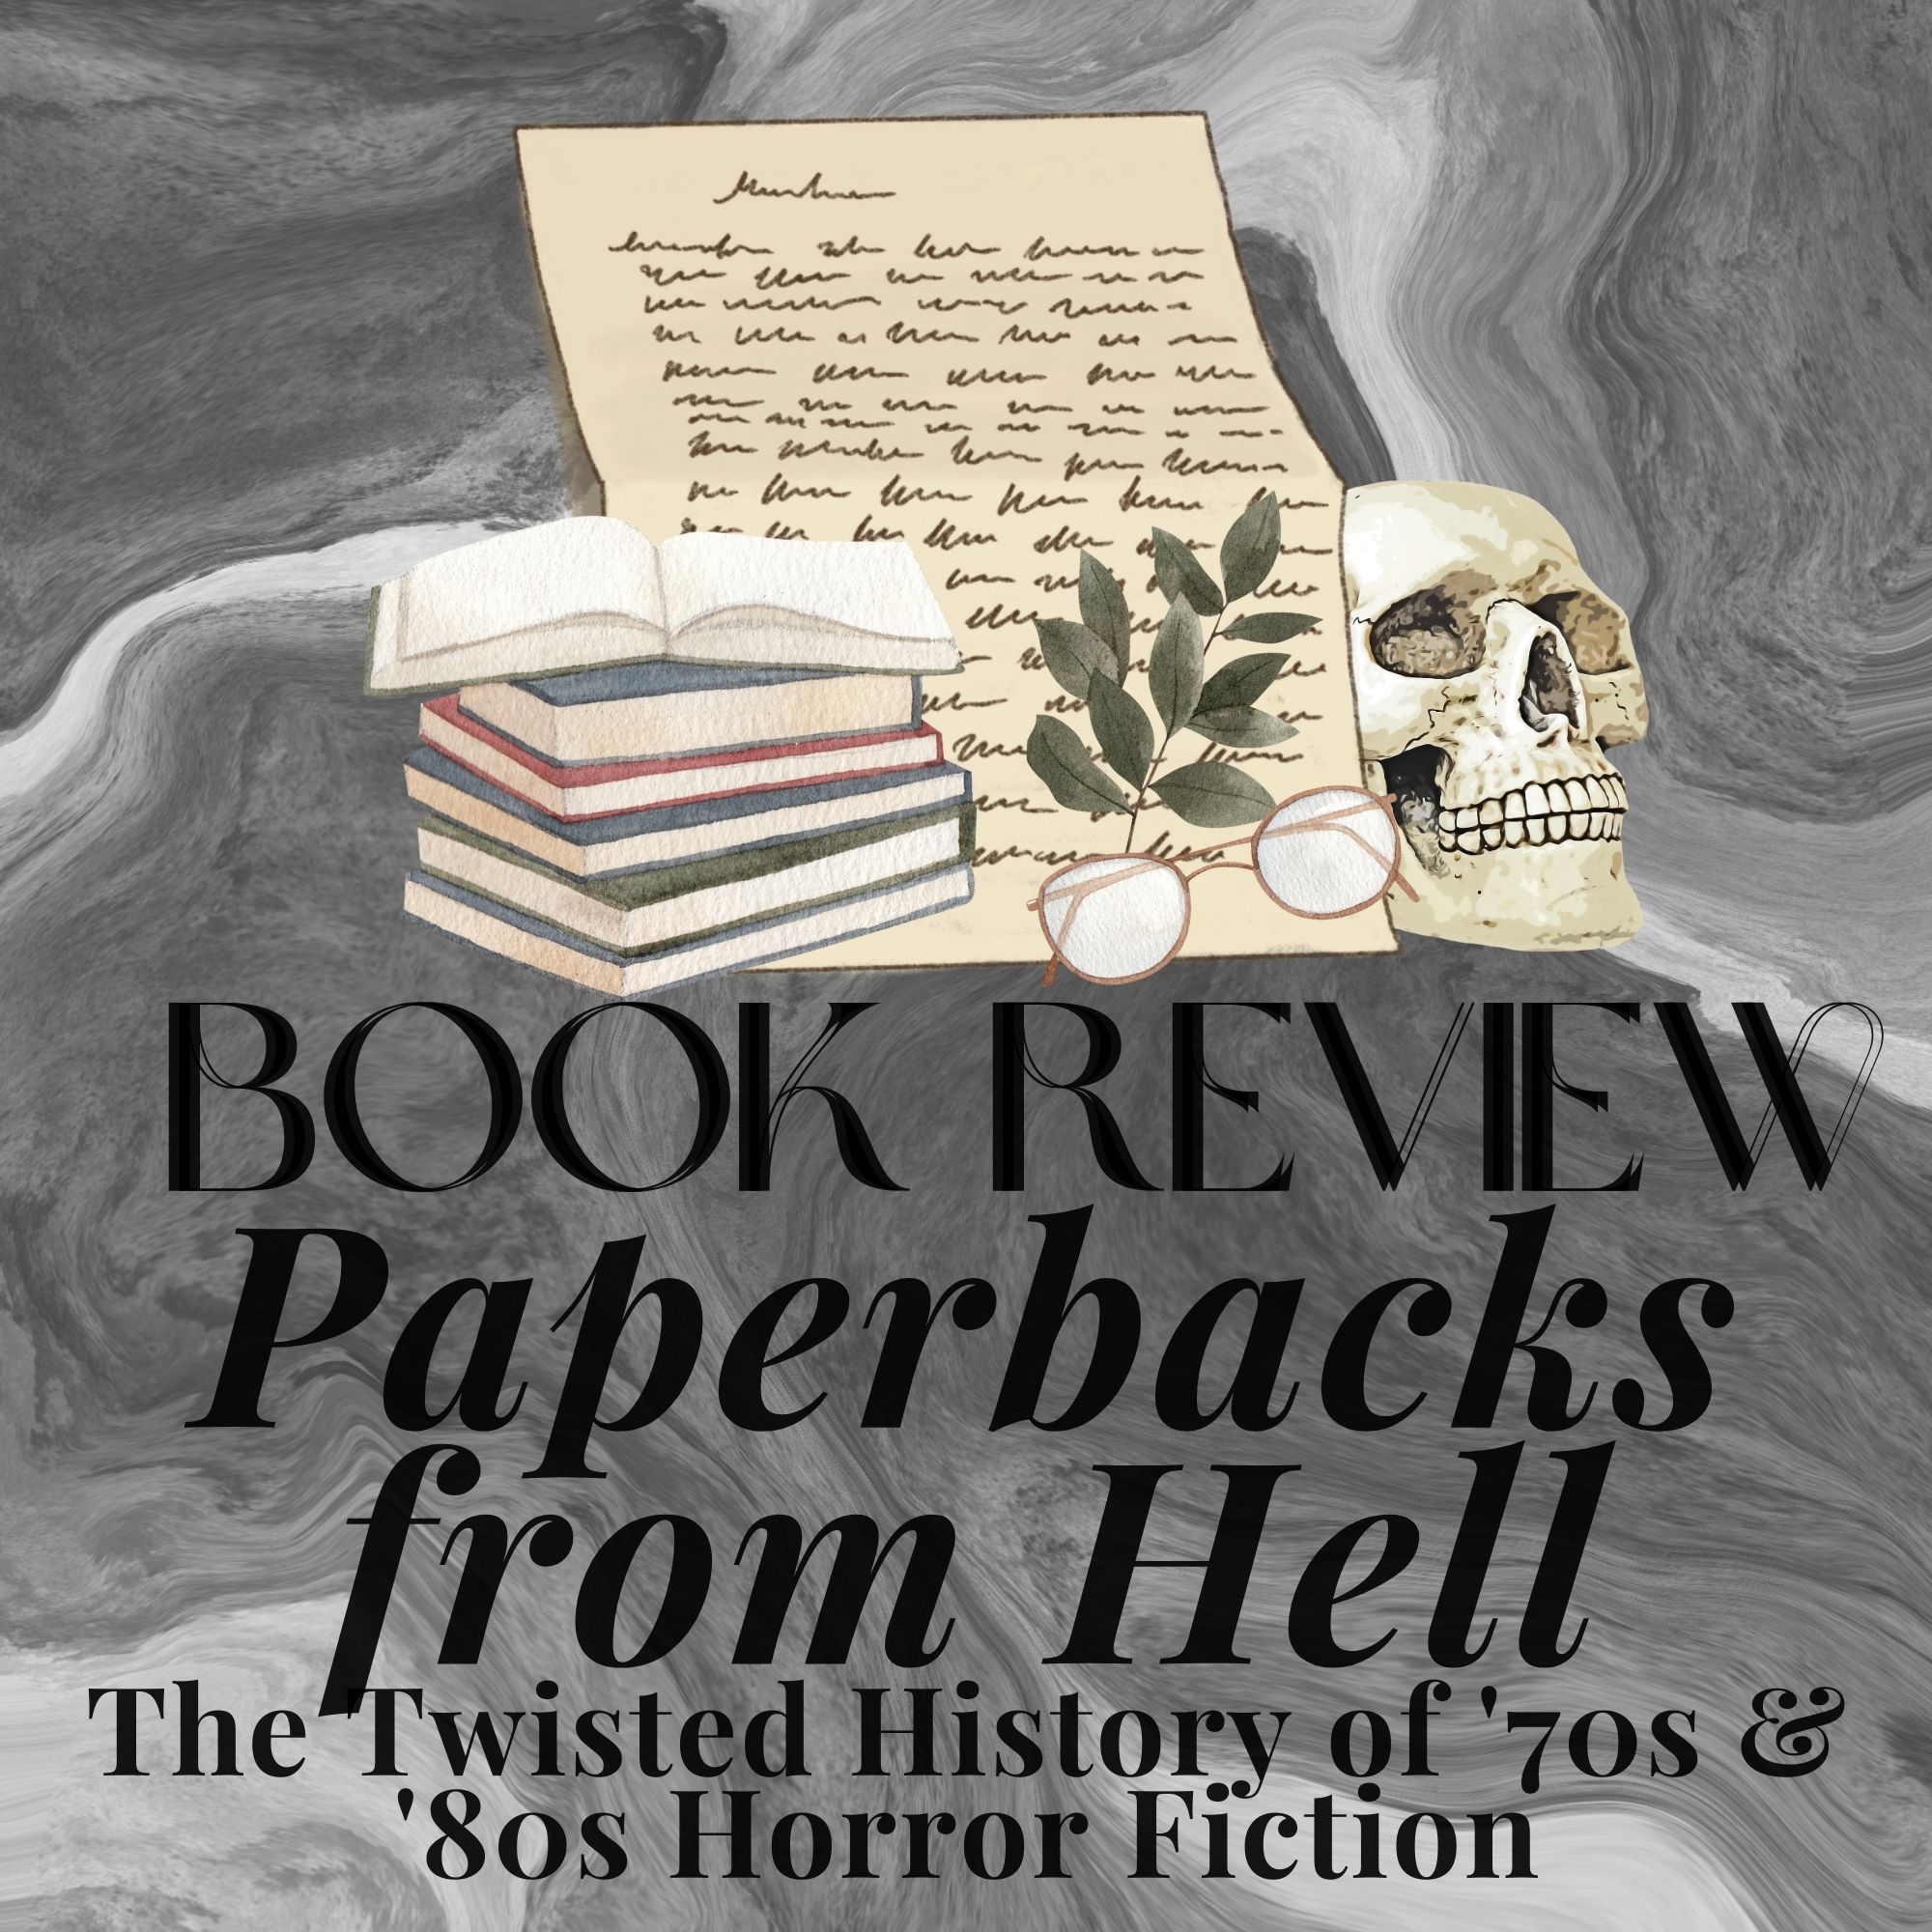 Good Reads Challenge Book Review:  Paperbacks from Hell, The Twisted History of ’70s & ’80s Horror Fiction